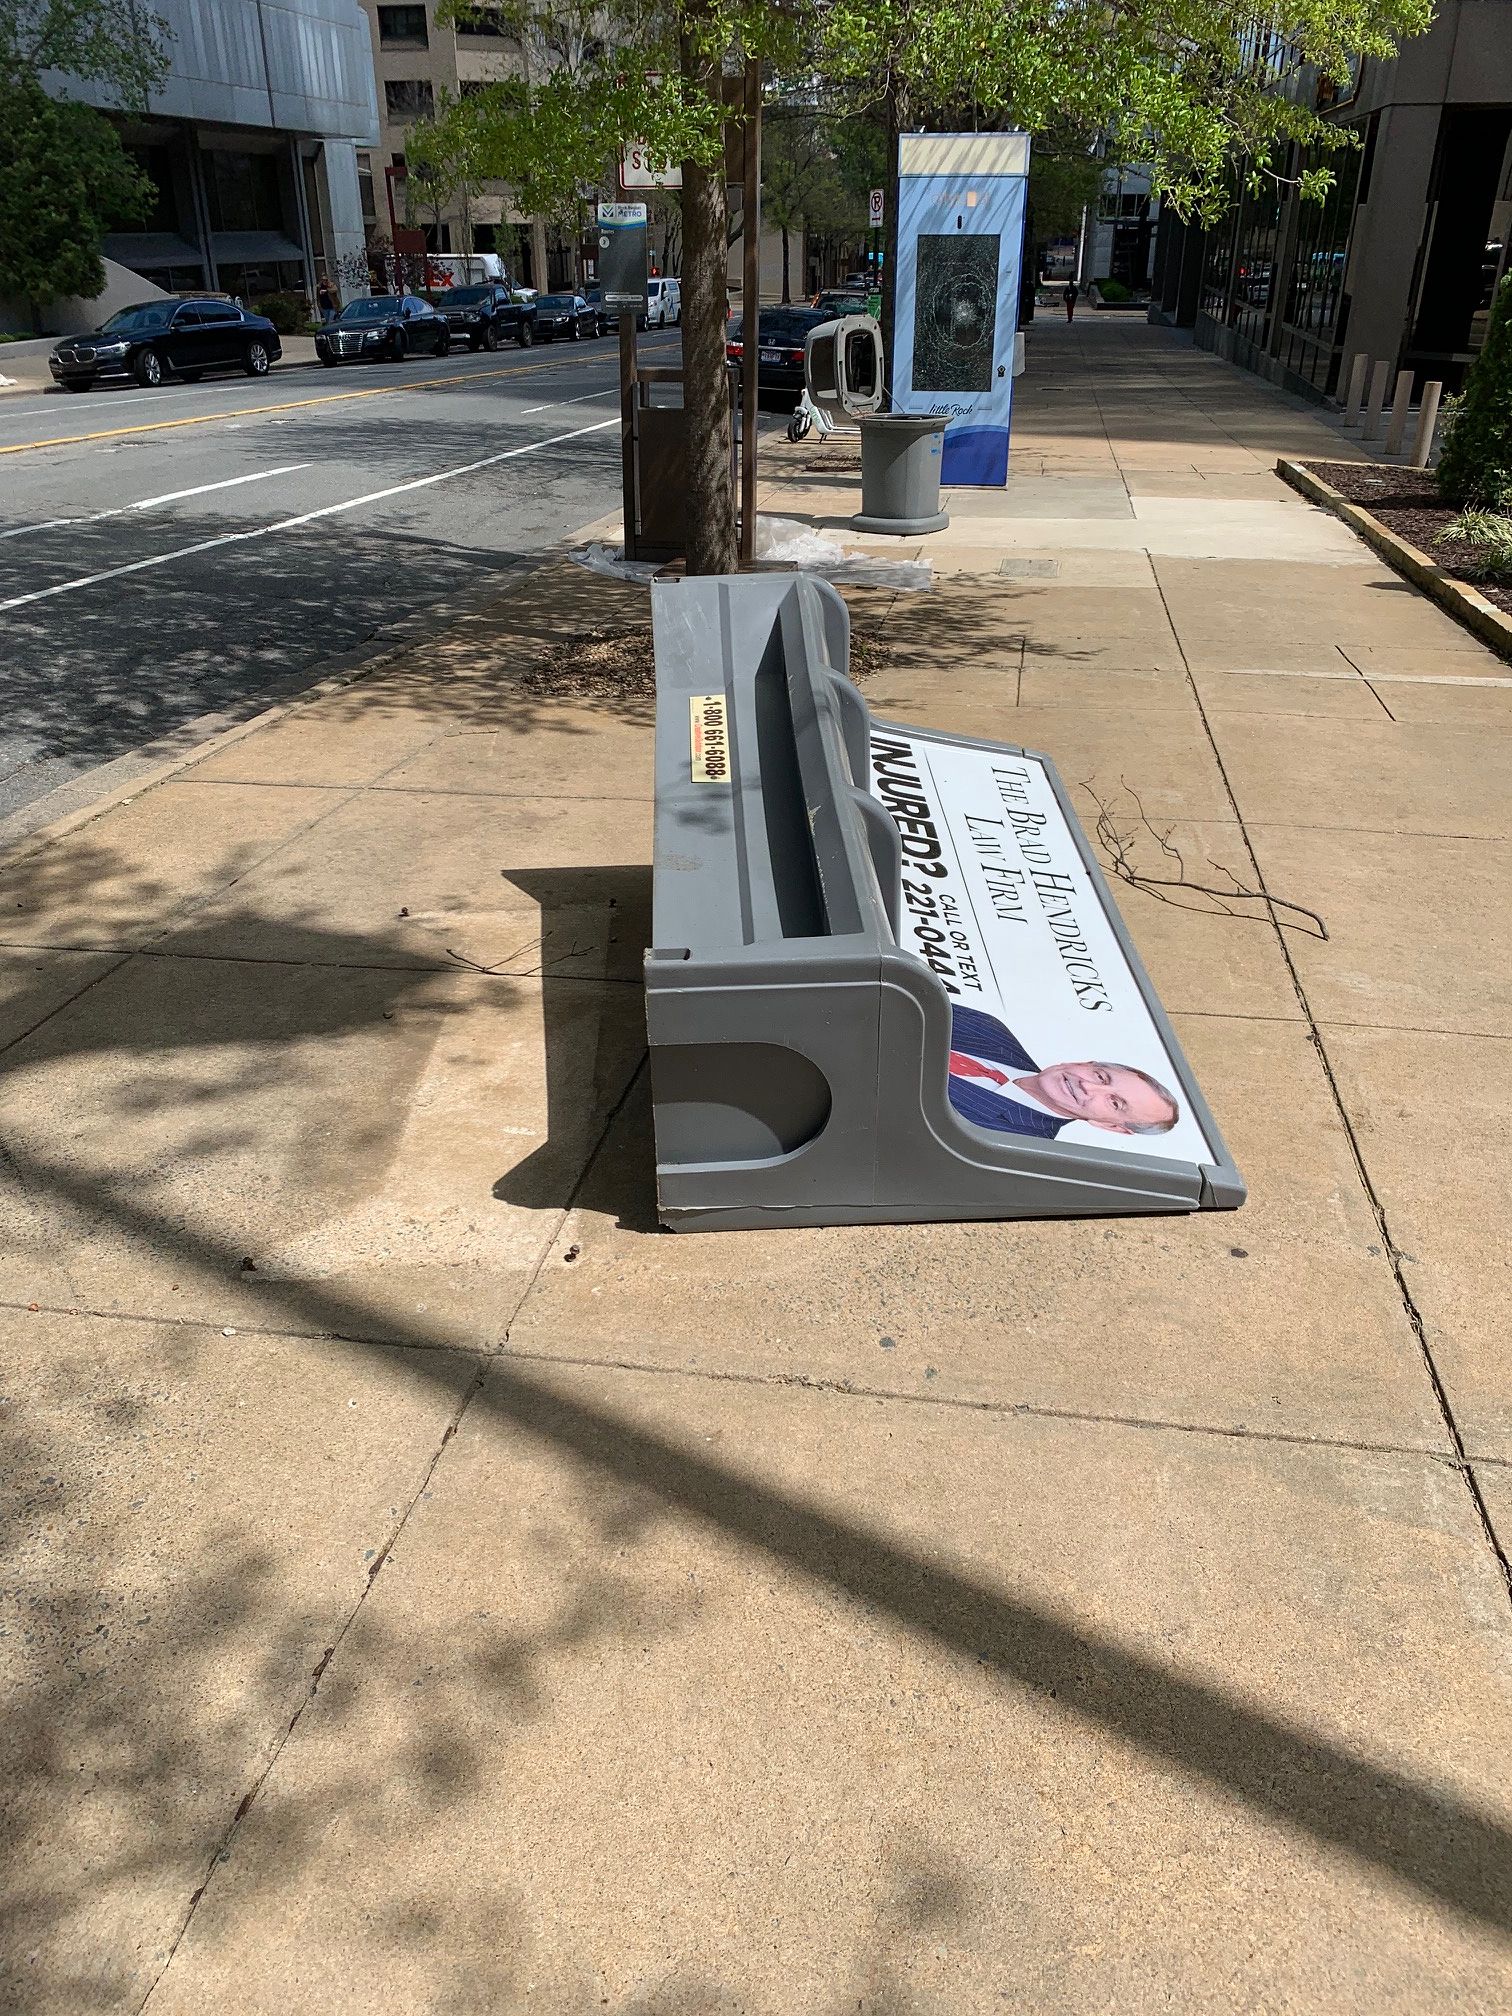 A bus bench with an ad for a personal injury lawyer on its back, unanchored from the pavement and tipped over so the lawyer is sprawled on his back.